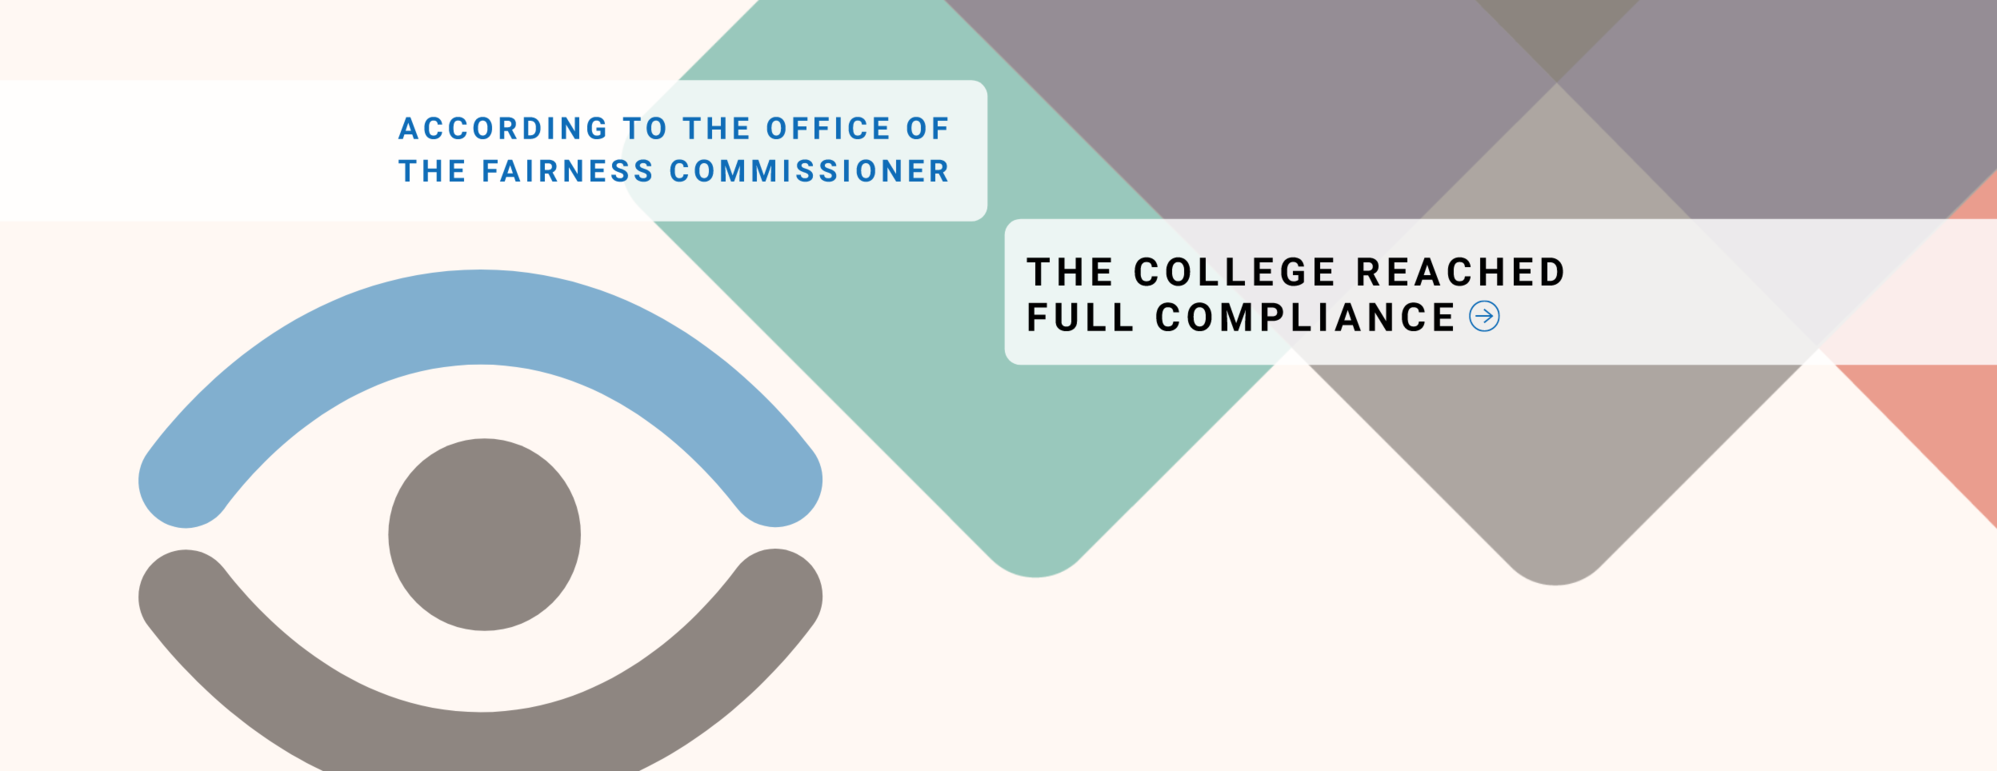 According to the office of the fairness commissioner. The College reached full compliance